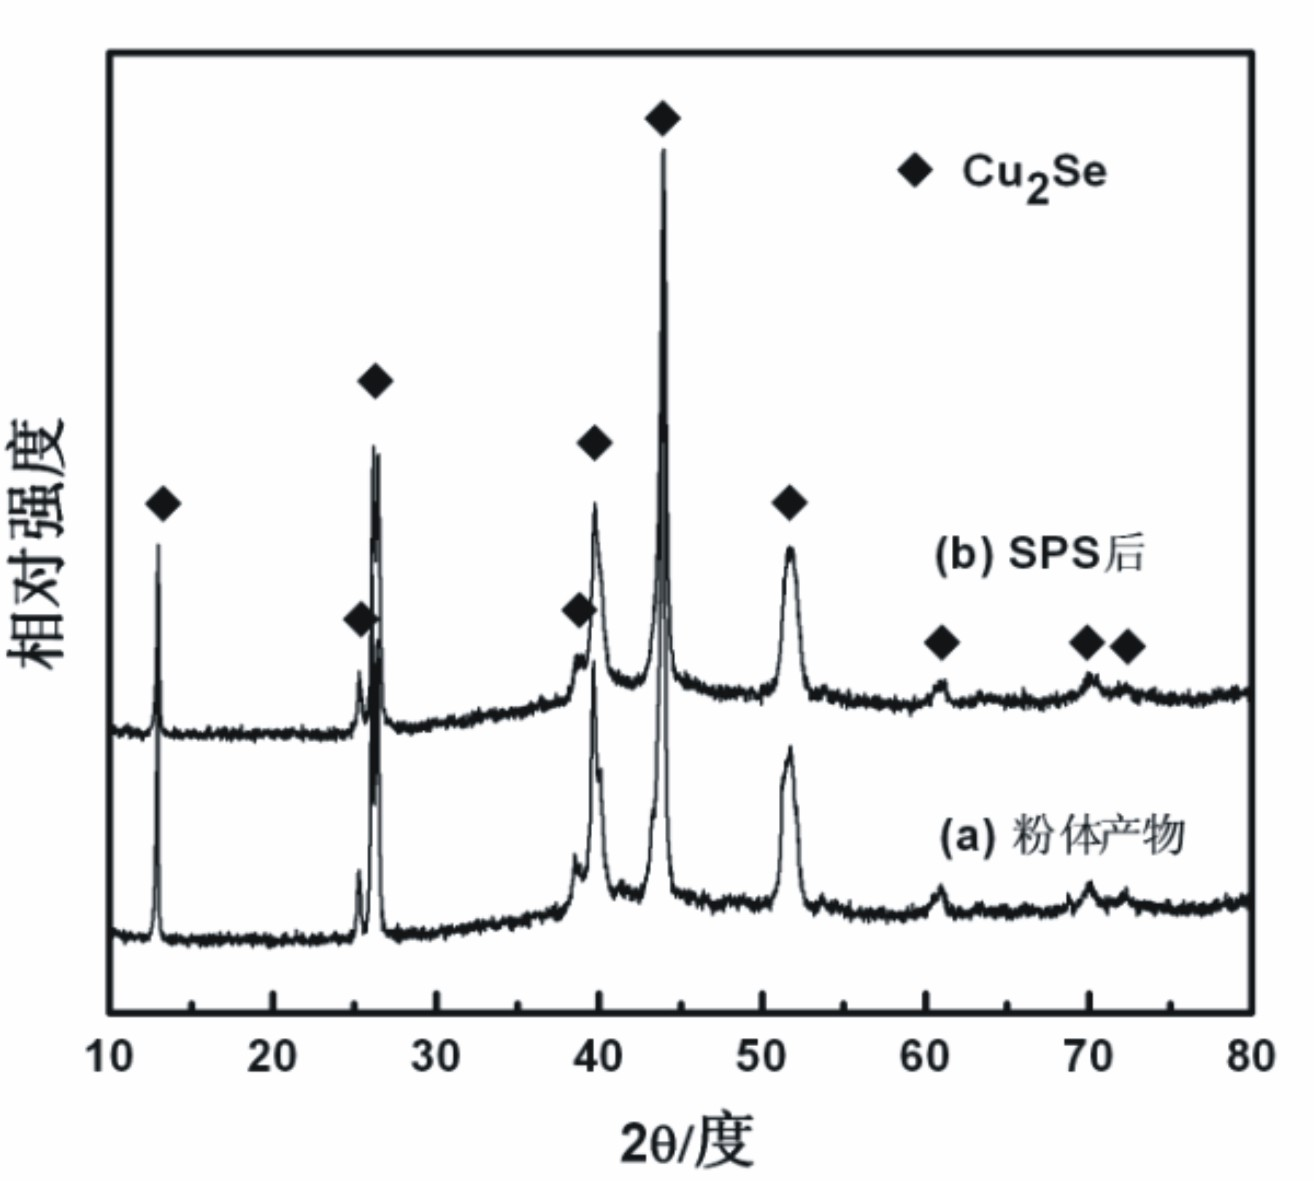 Method for preparing Cu2Se thermoelectric material by low-temperature solid-phase reaction